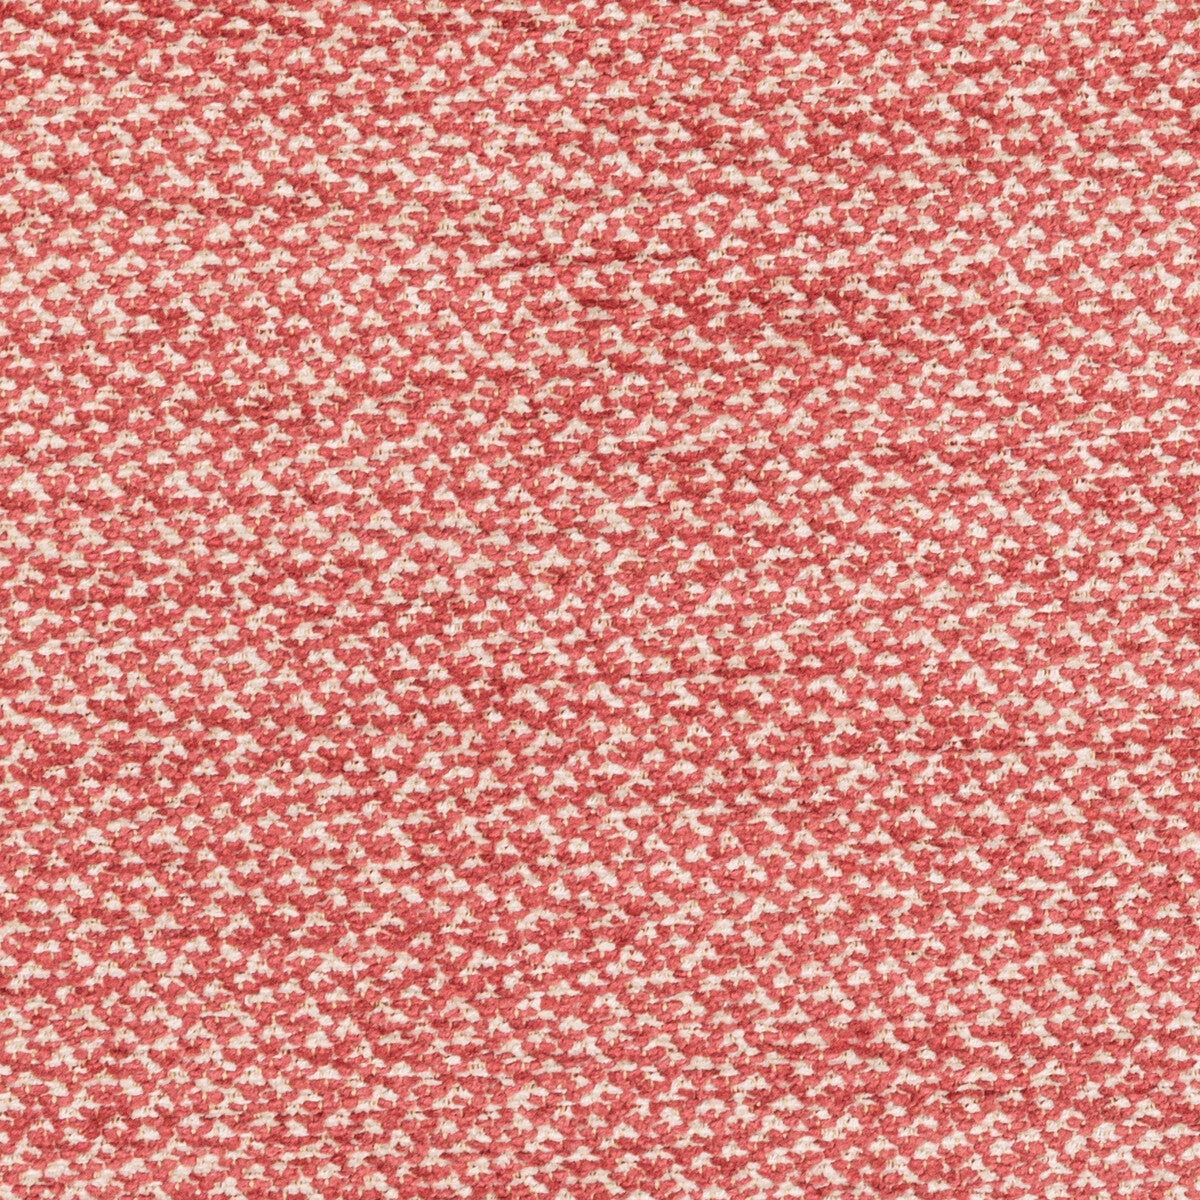 Sasson Texture fabric in pink color - pattern 8022122.7.0 - by Brunschwig &amp; Fils in the Chambery Textures III collection